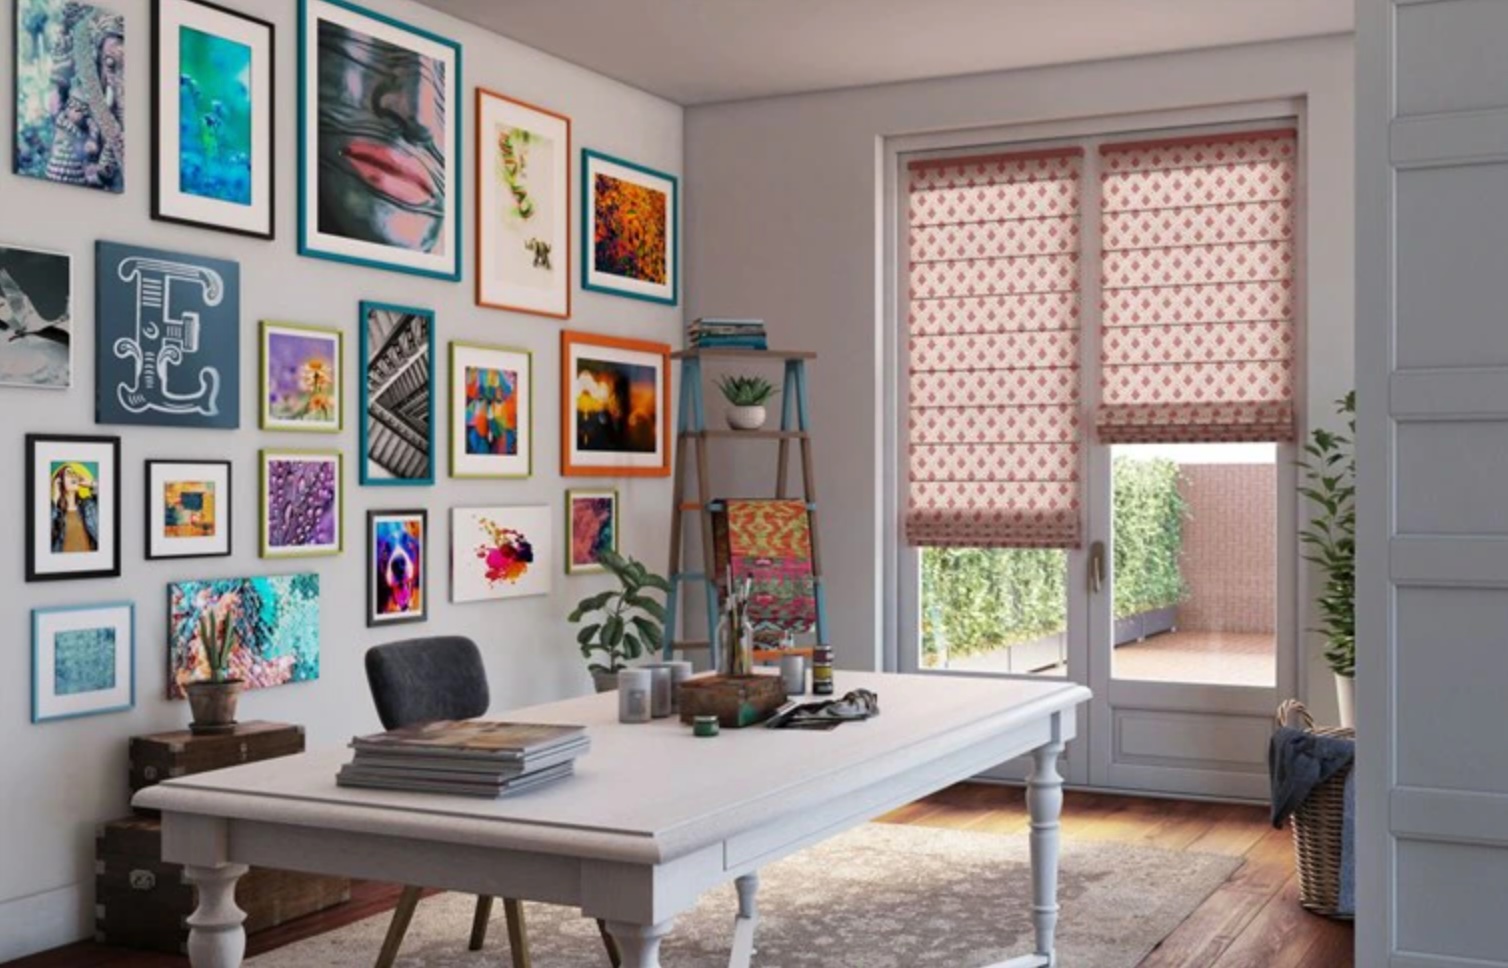 Levolor's Roman Shades (in Flat Fantasia Coral) Let in Light in a Colorful Home Office